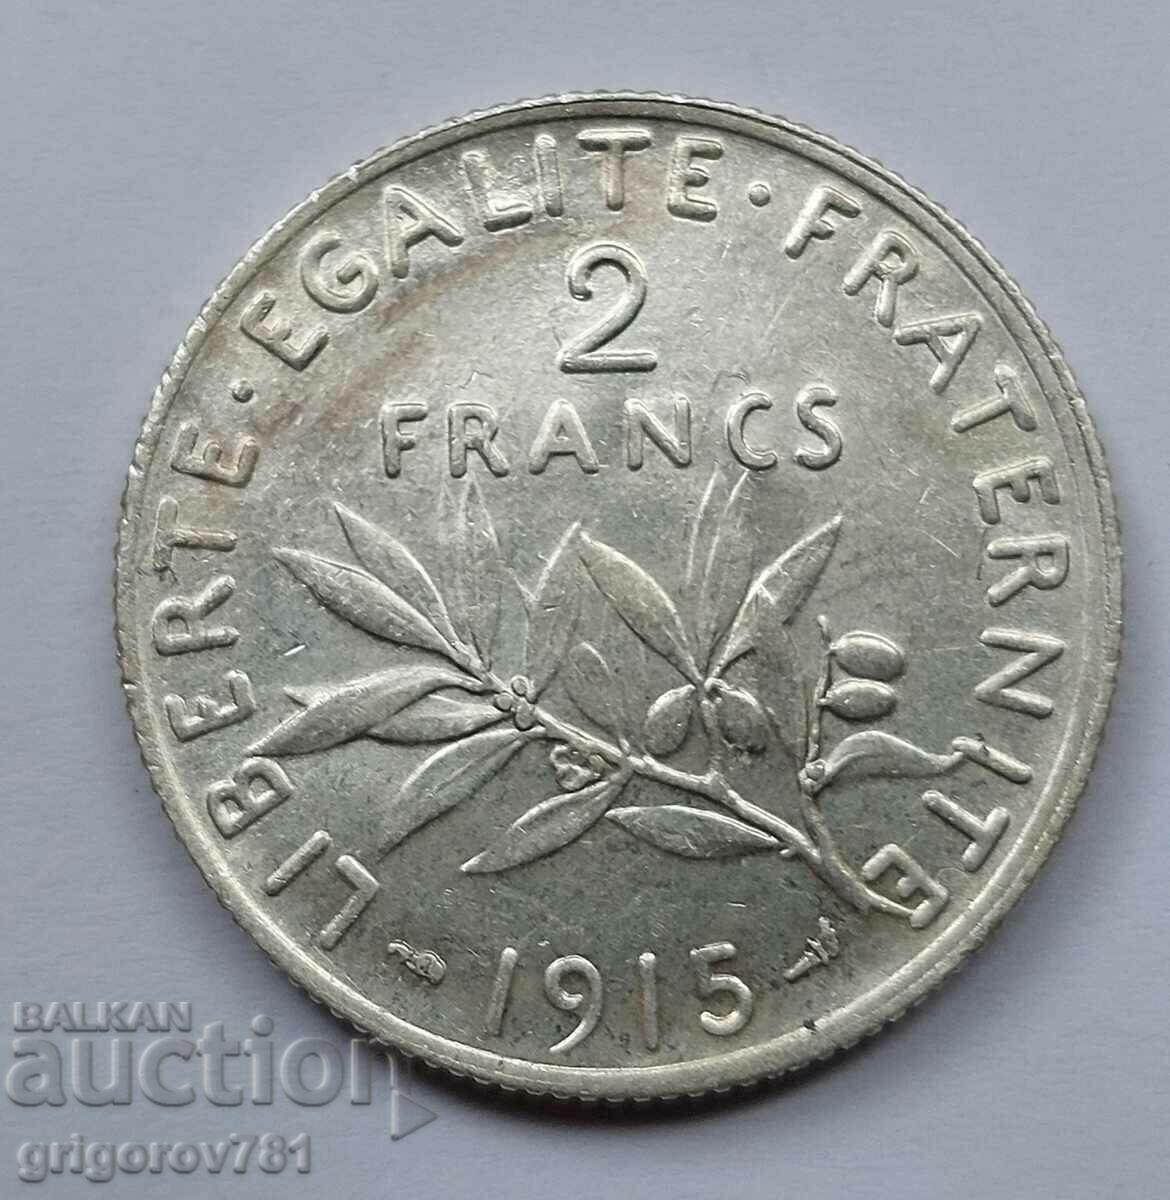 2 Francs Silver France 1915 - Silver Coin #124